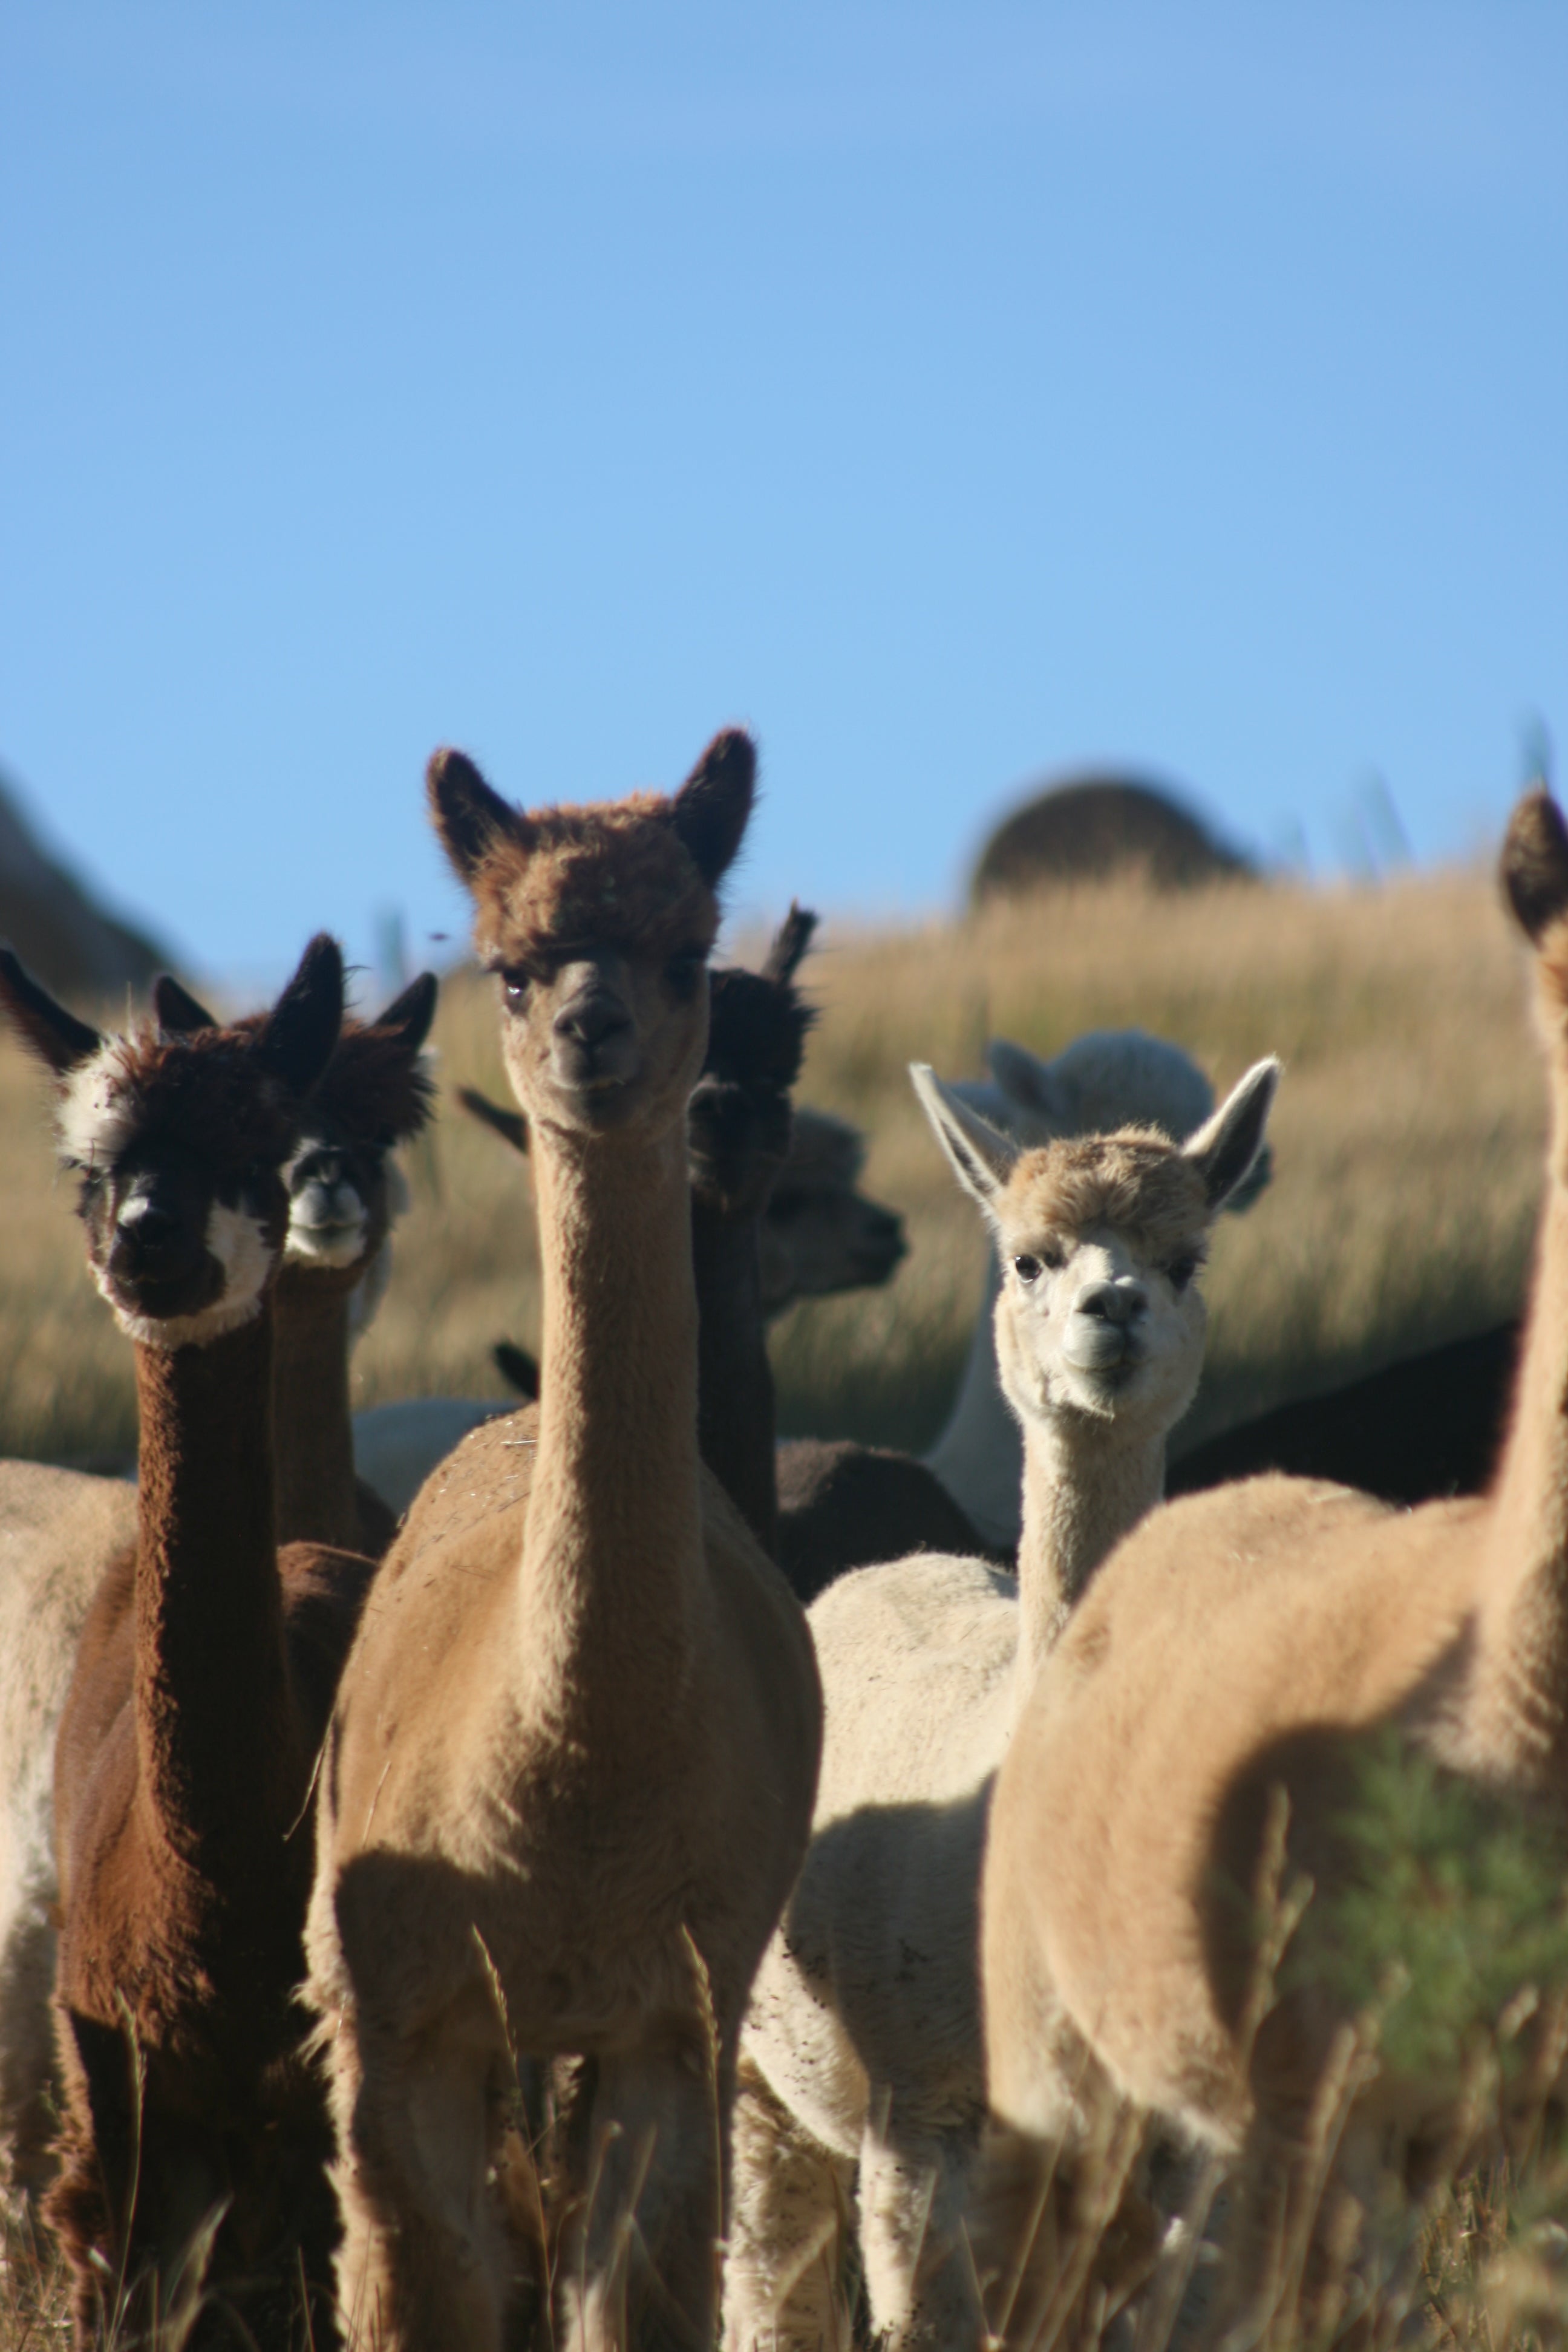 Pack out to see alpacas!